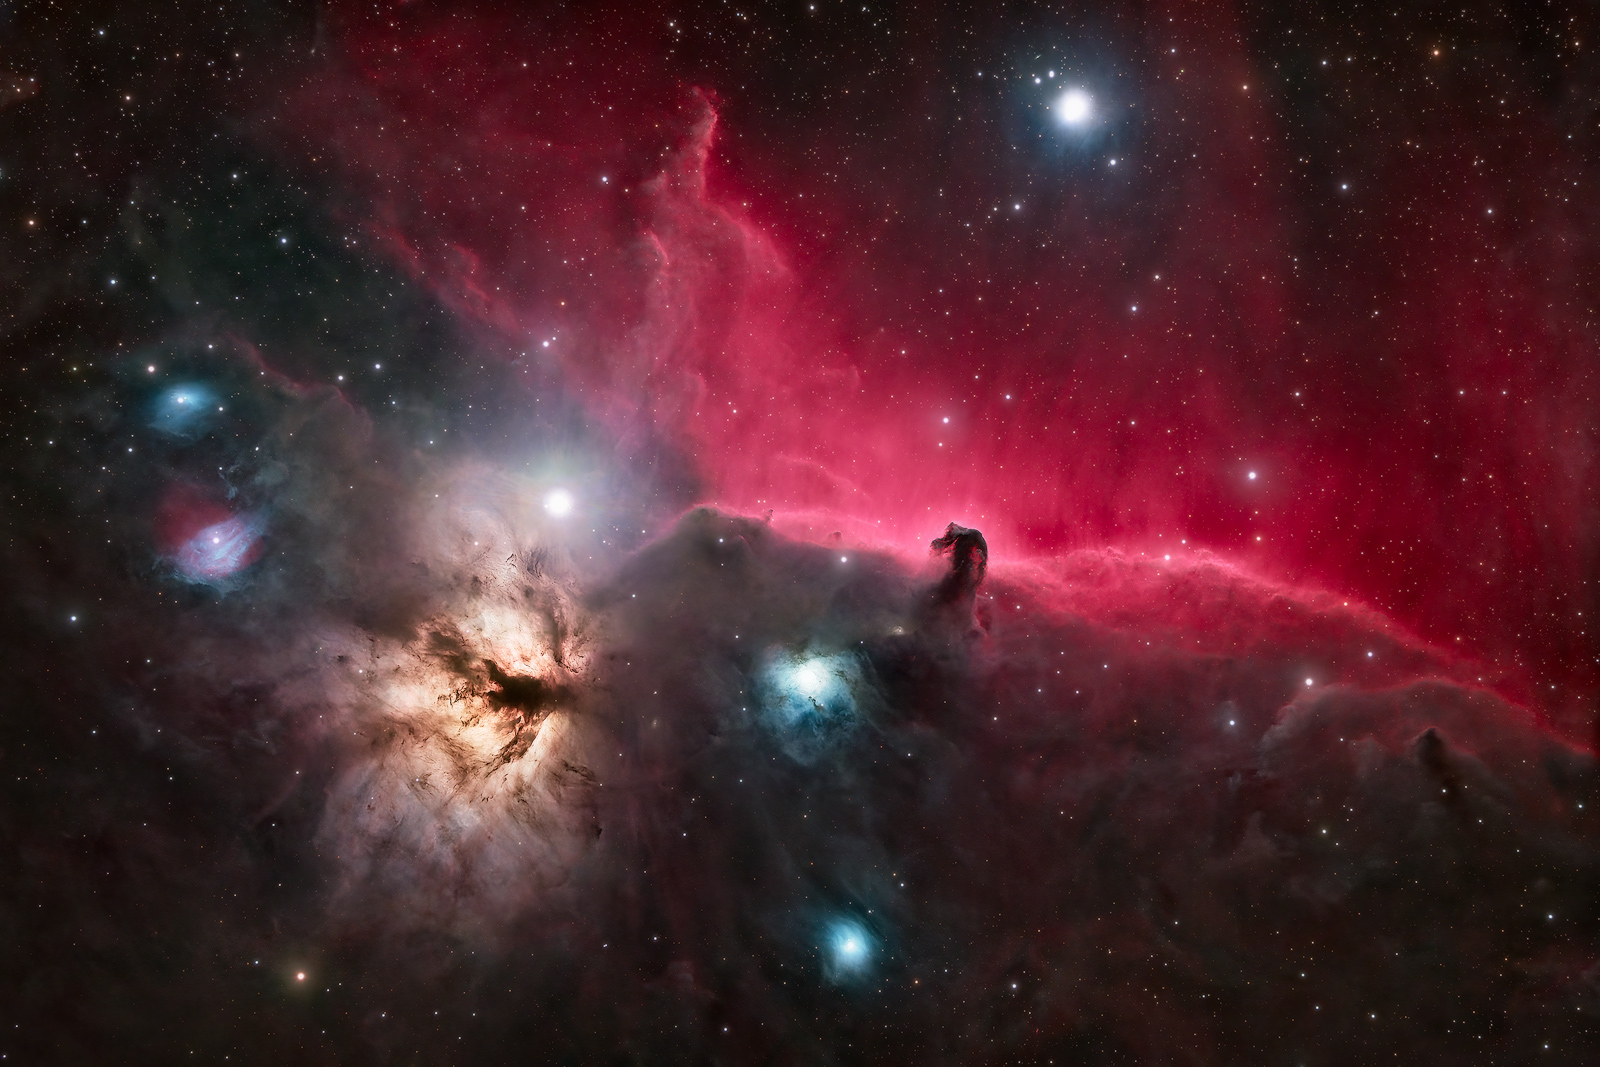 The Horsehead Nebula in the region of IC 434, located in the constellation of Orion.